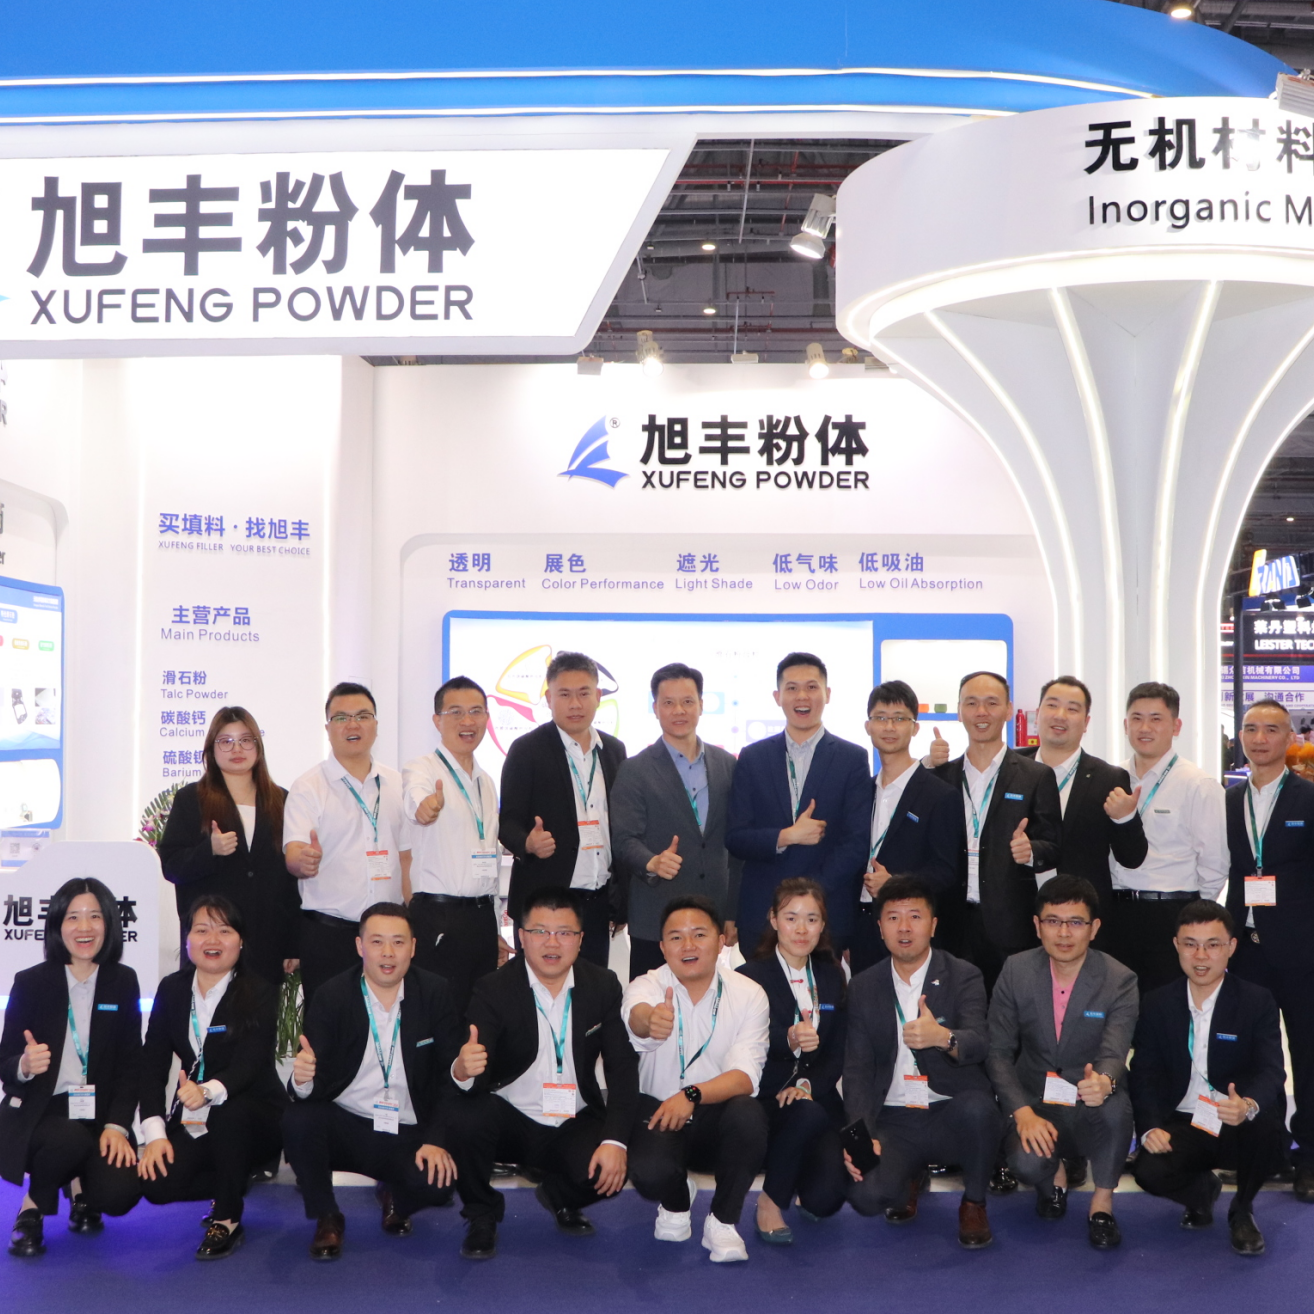 2019 International Rubber Exhibition came to a successful conclusion，and xufeng powder carries reputation